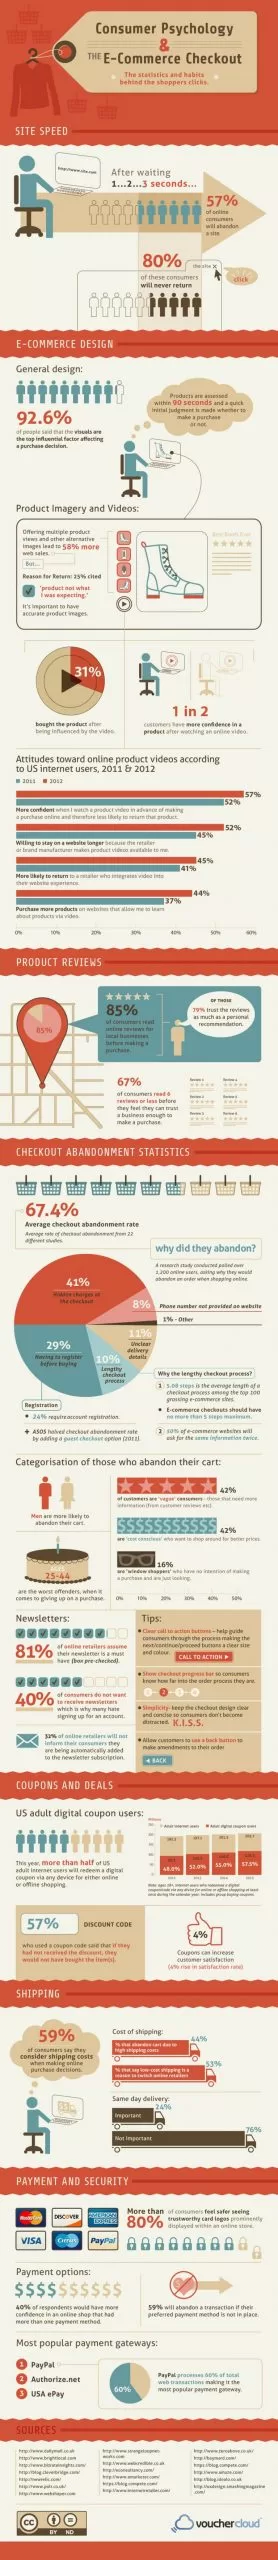 Consumer-Psychology-and-ECommerce-Checkouts-Infographic-768x7067